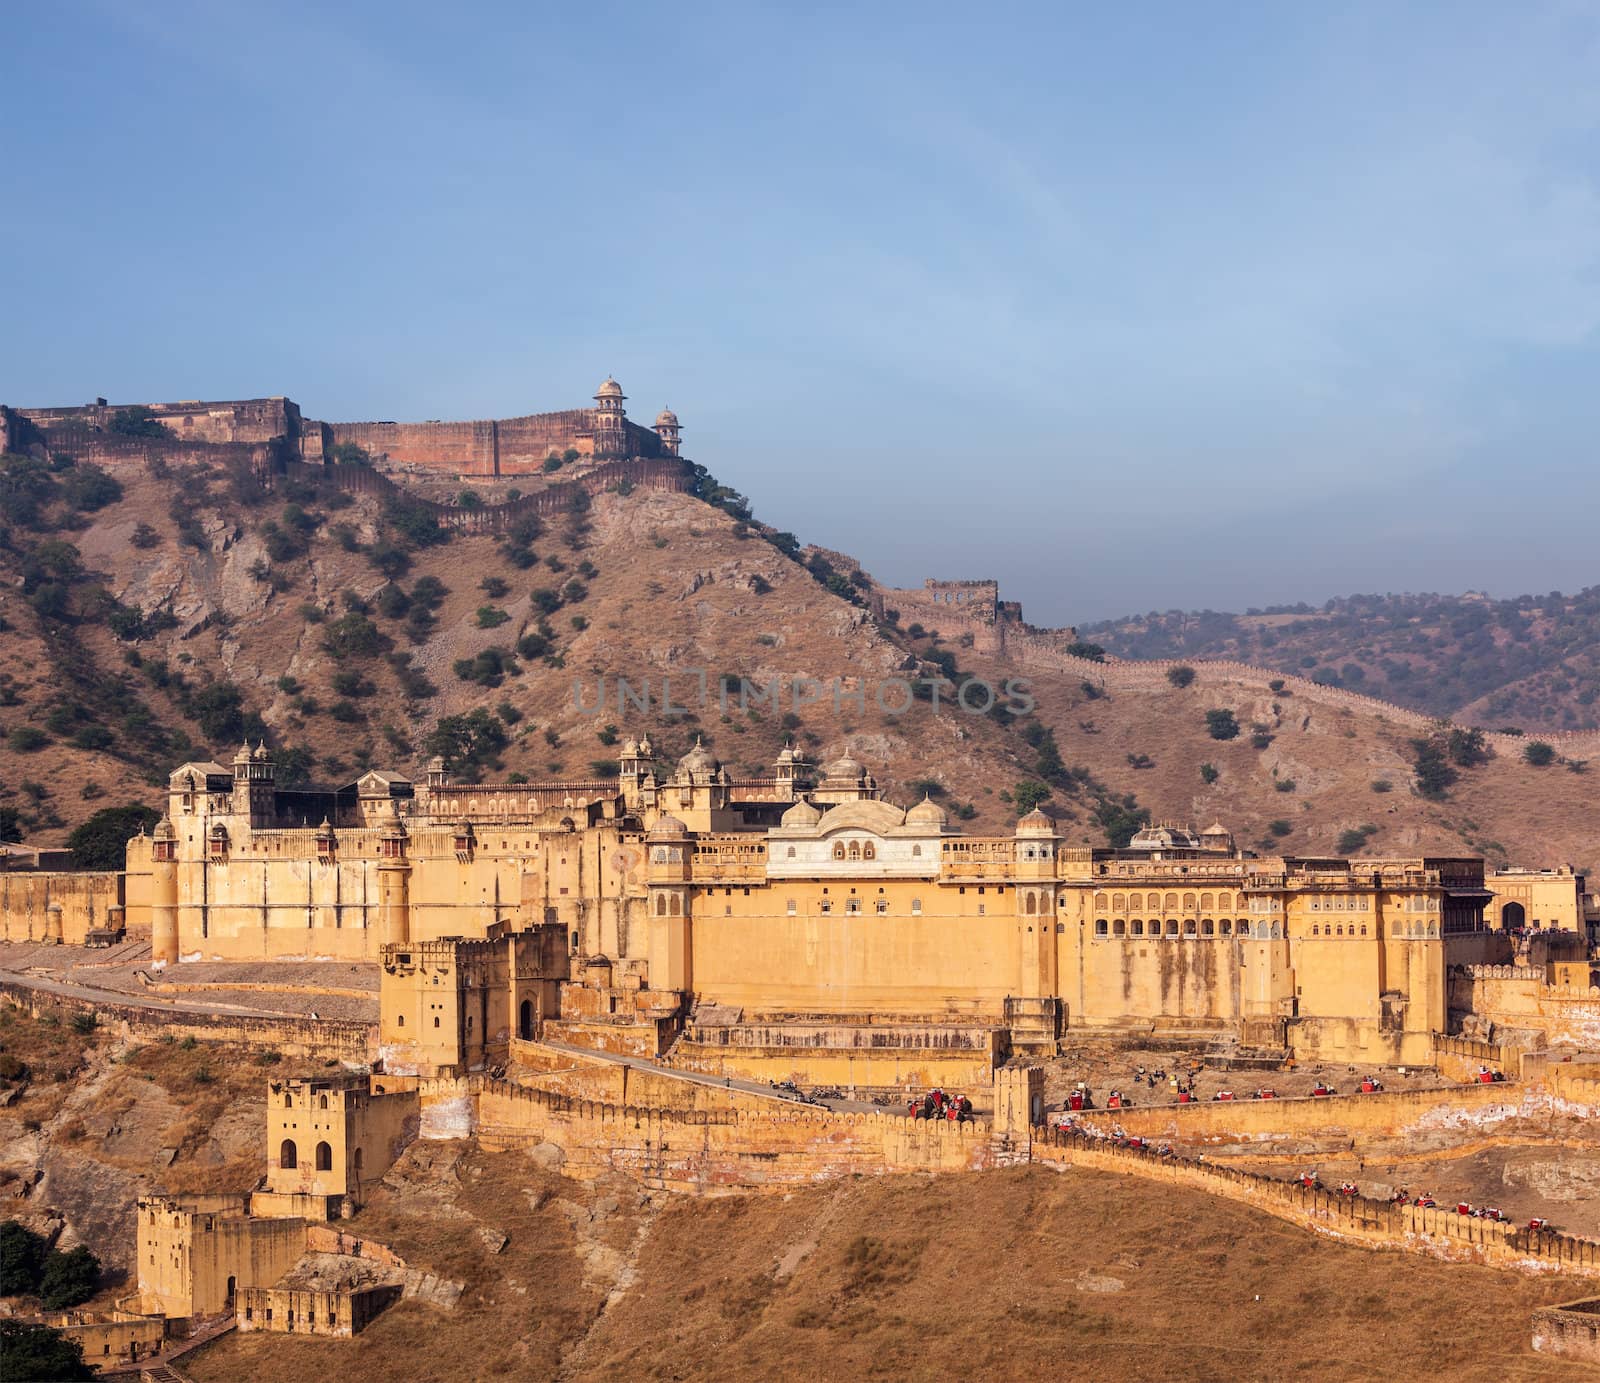 Amer (Amber) fort, Rajasthan, India by dimol